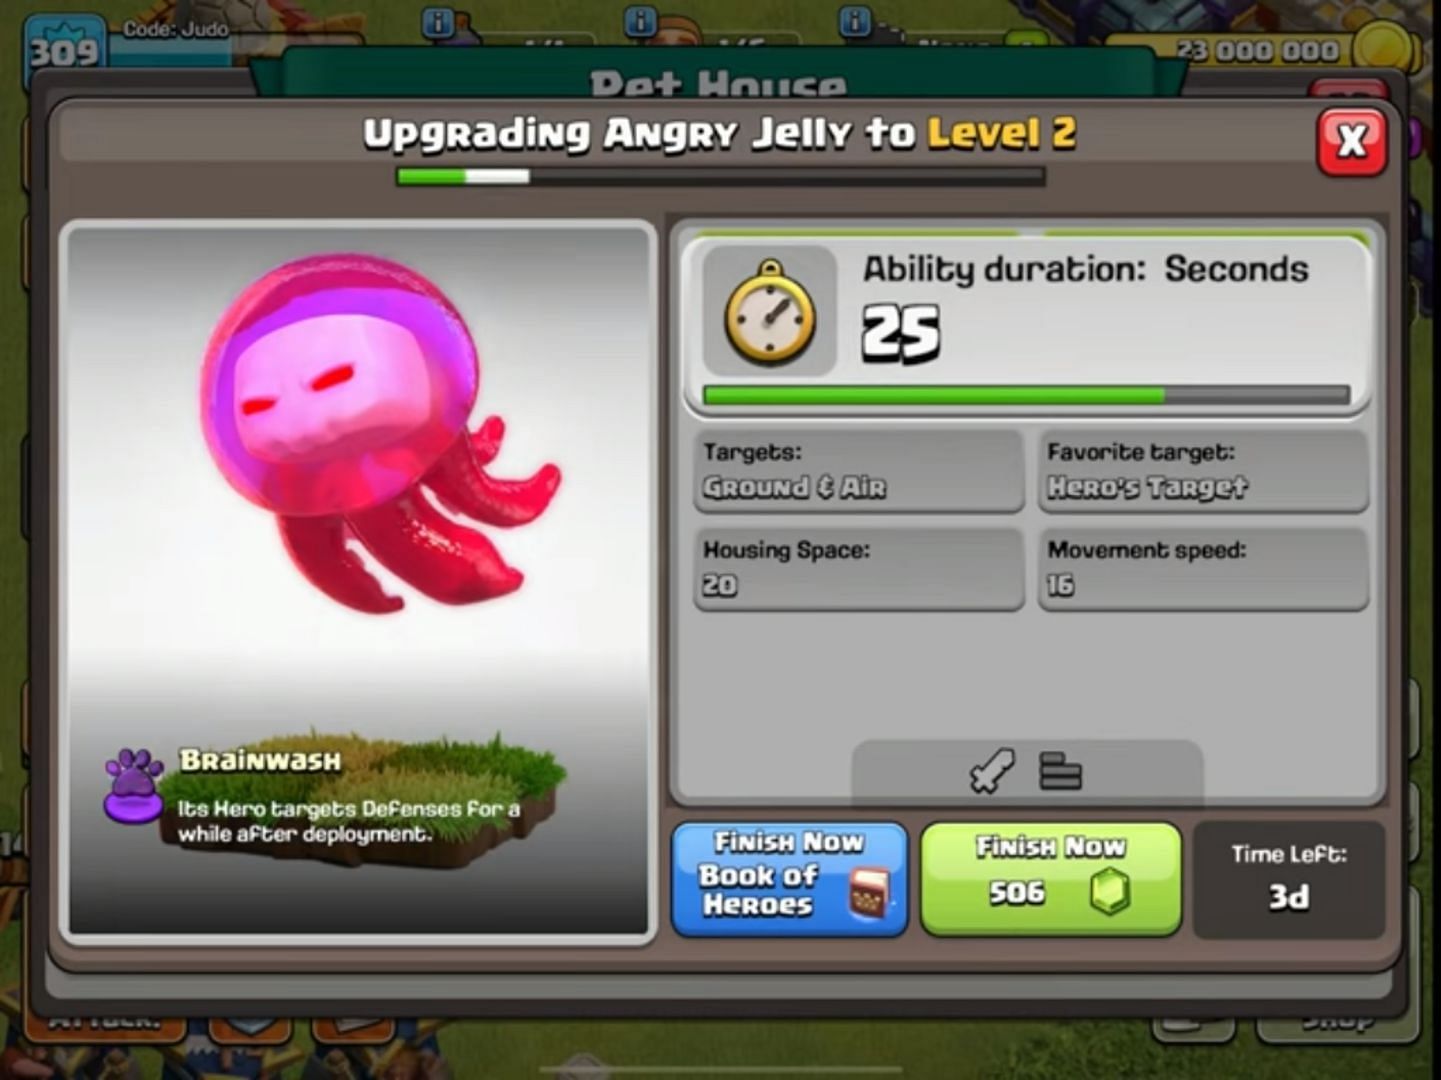 Angry Jelly upgrade (Image via Judo Sloth Gaming || Supercell)